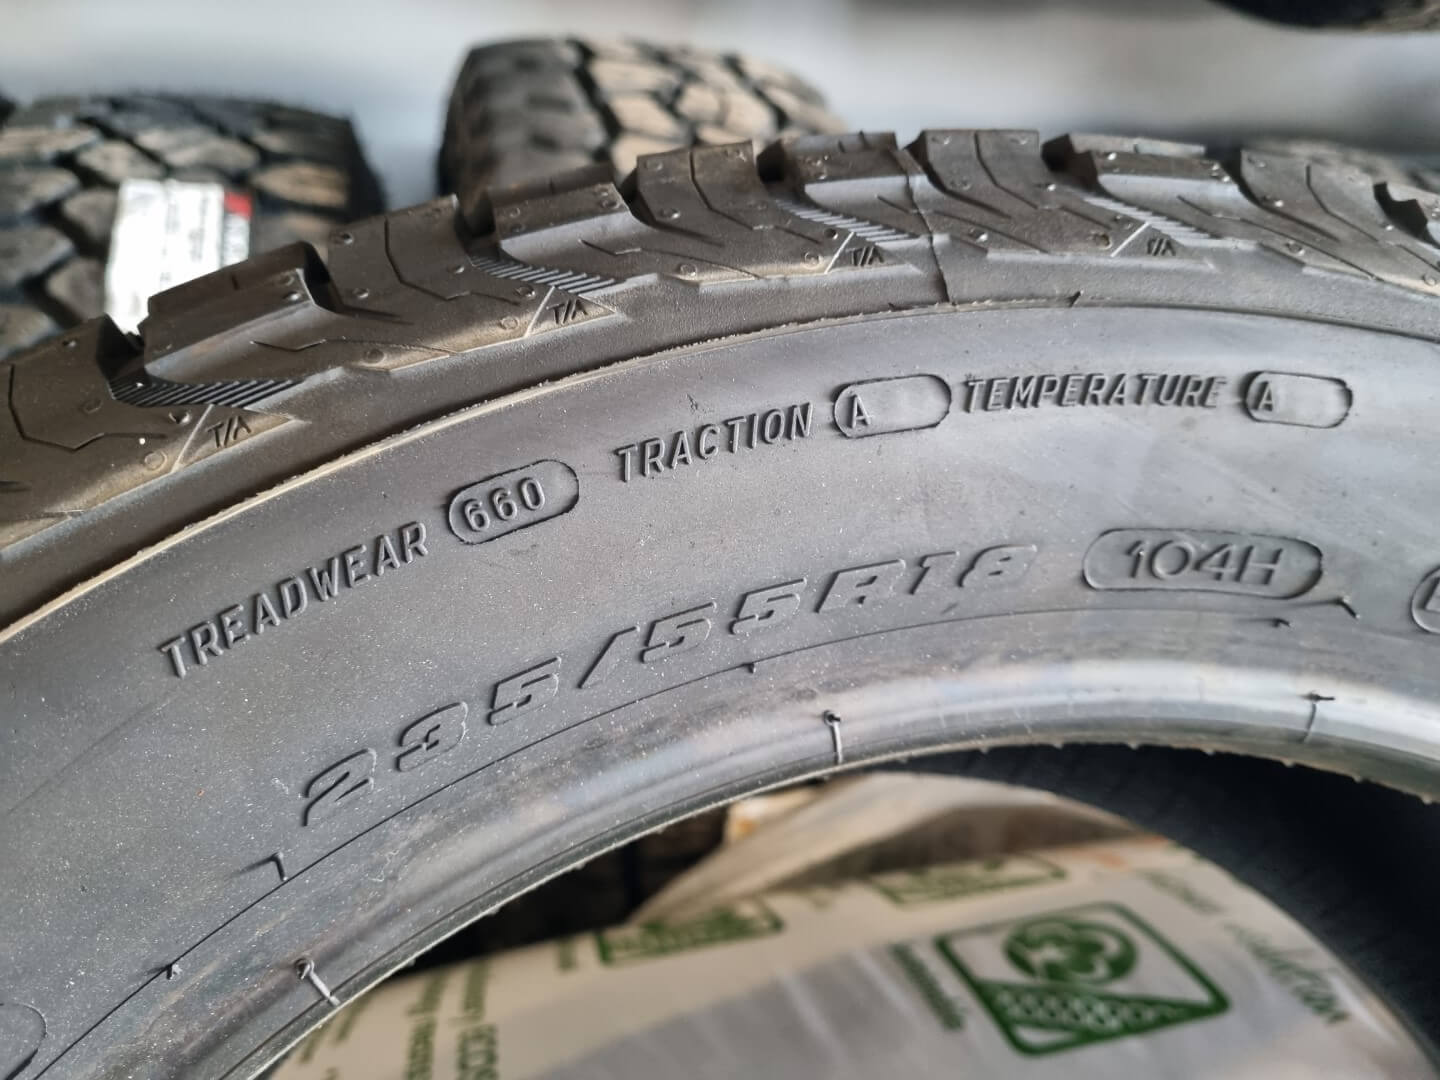 UTQG rating stamps on a tyre sidewall.